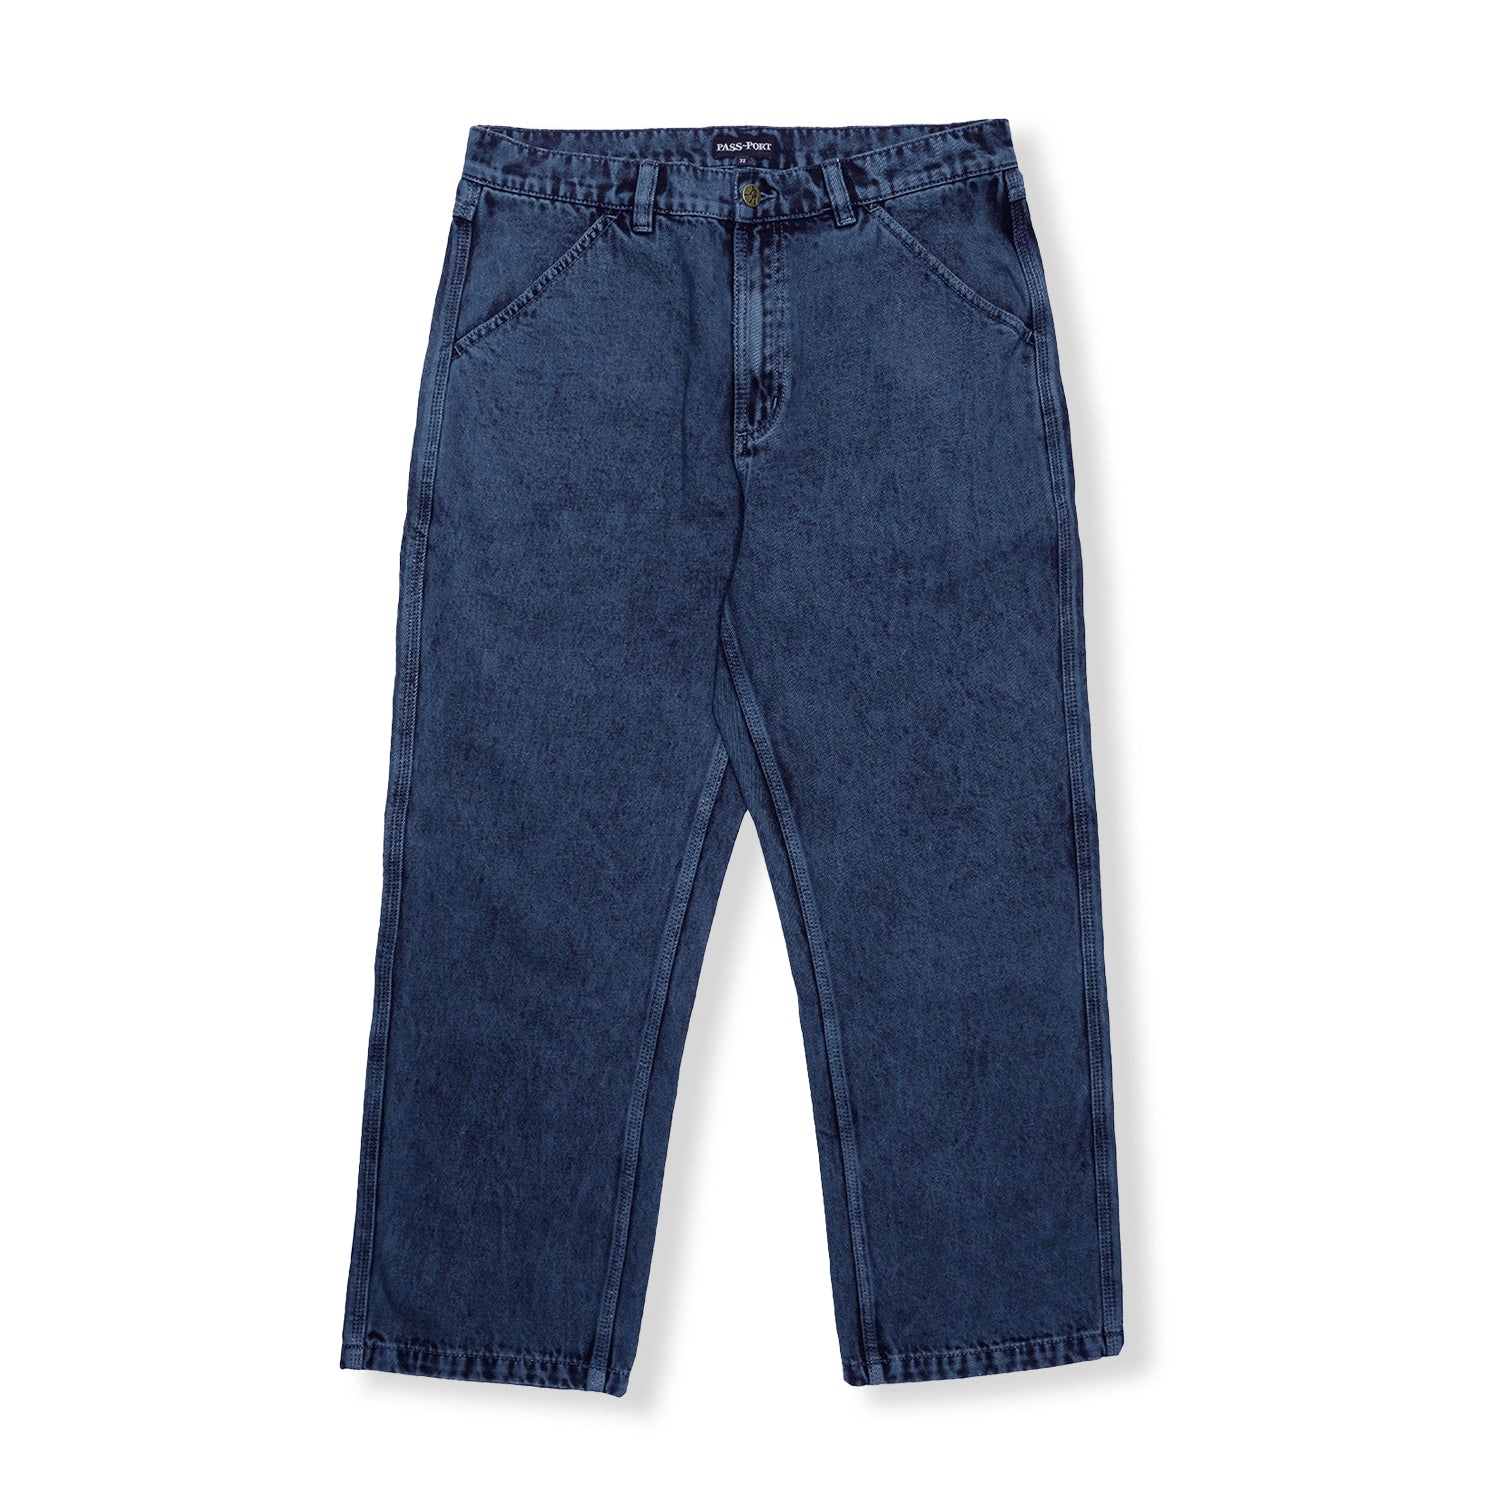 Workers Club Jean, Over-Dye Navy